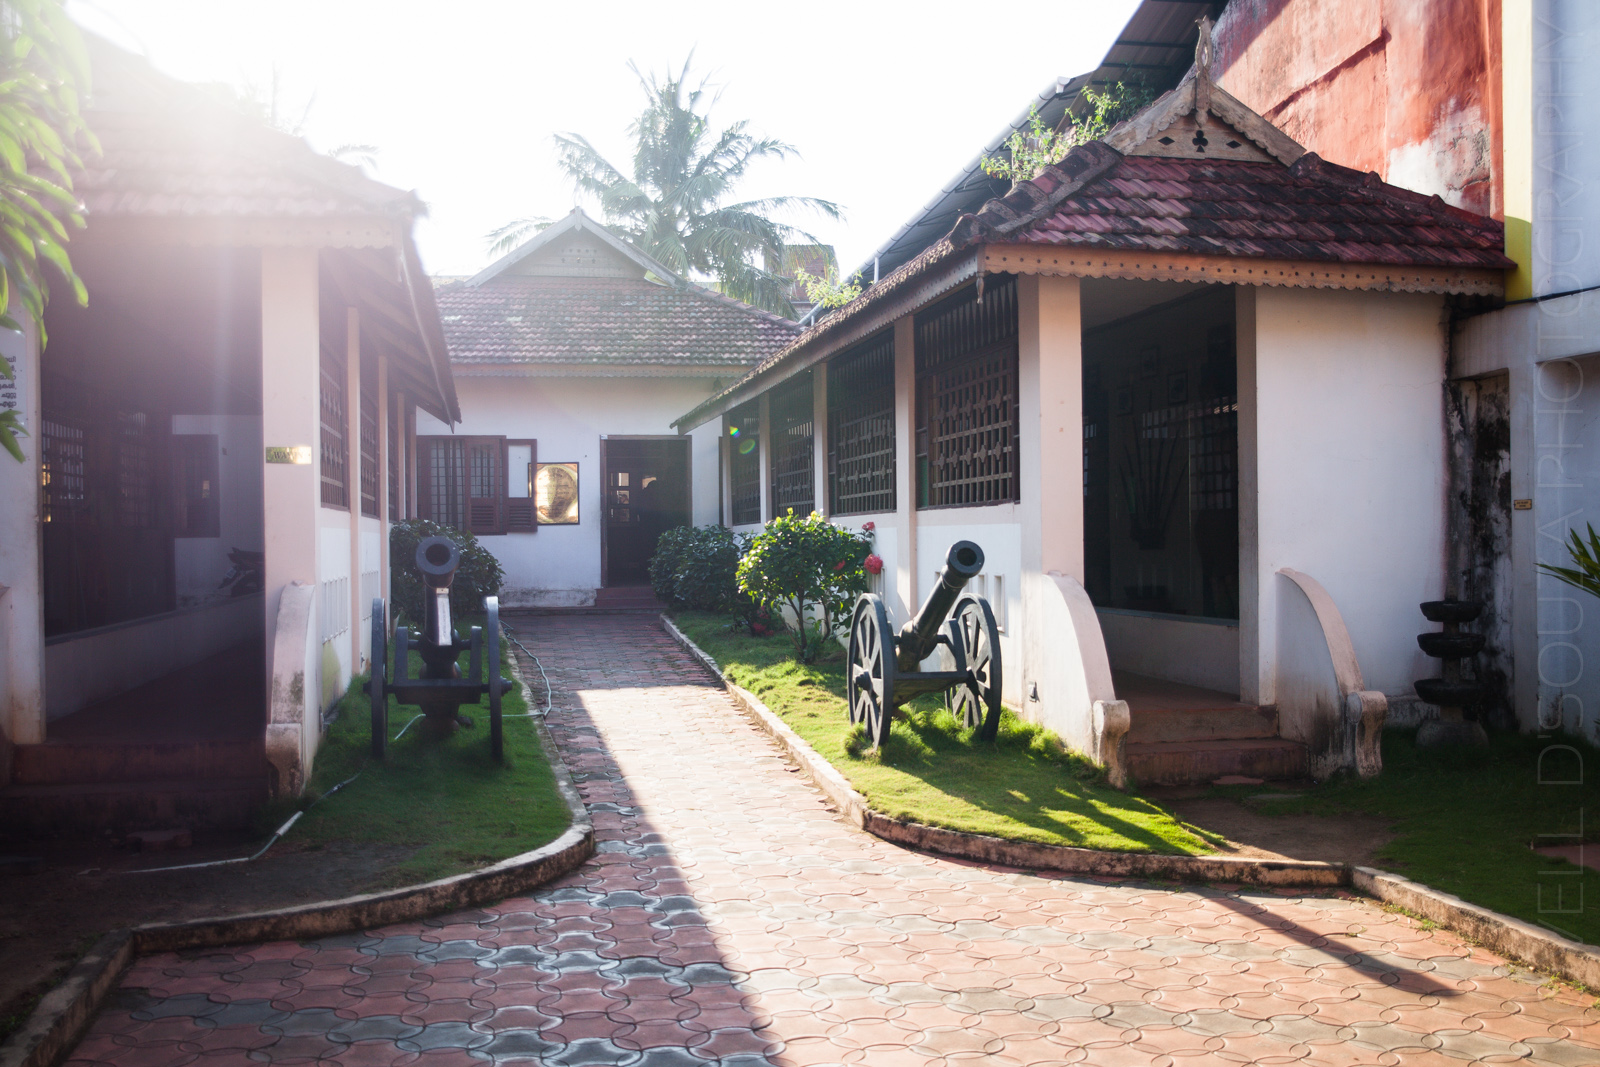 The Police Museum, Fort Kochi